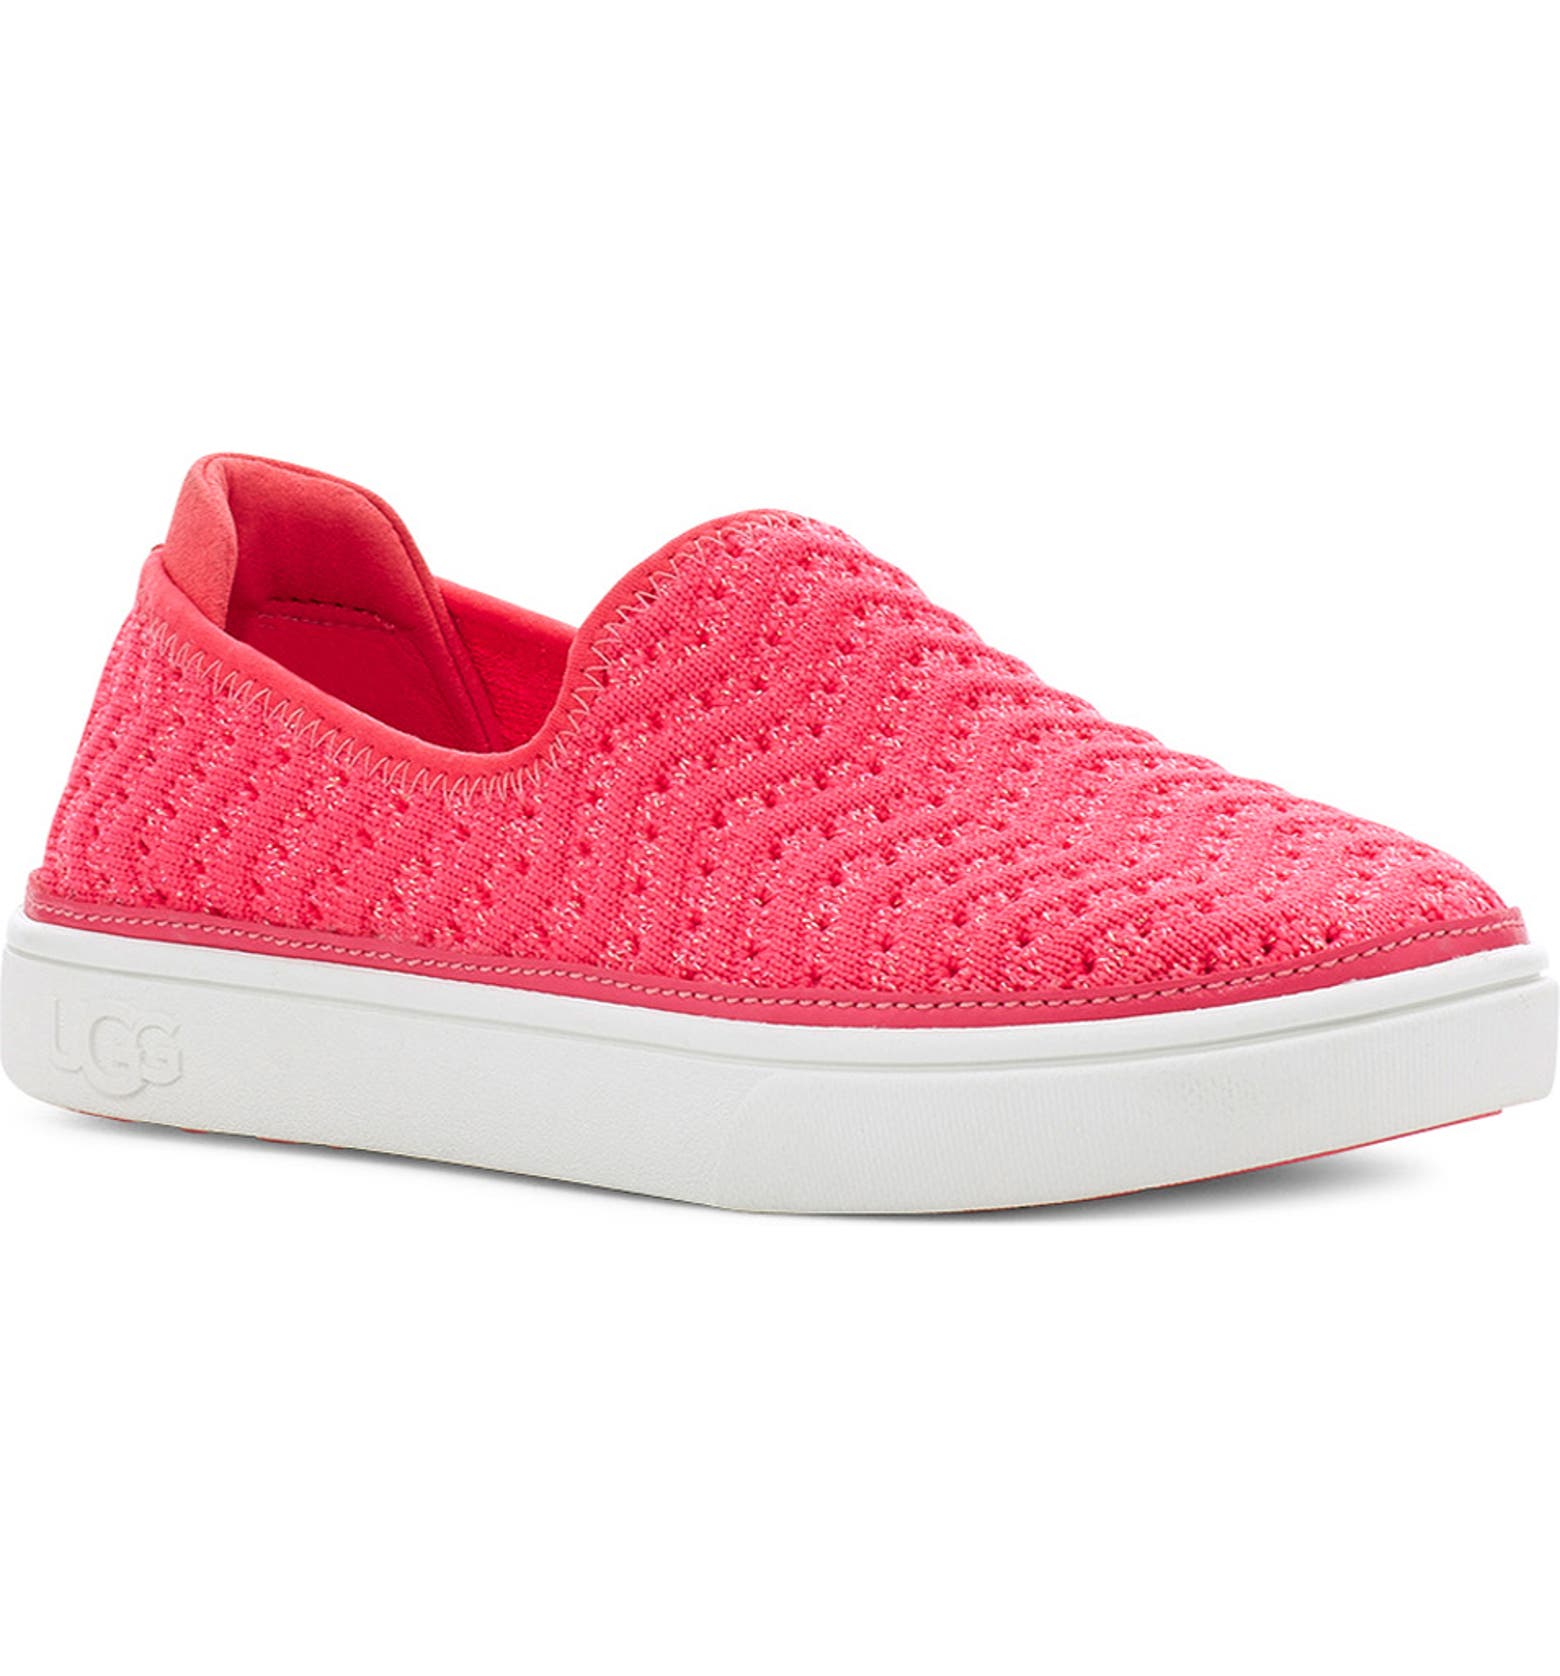 A breathable knit upper flecked with metallic shimmer defines an easy-going slip-on sneaker furnished with a cushioned footbed for play-all-day comfort. An antimicrobial lining made from recycled materials adds an eco-friendly touch while helping to keep little feet fresh.